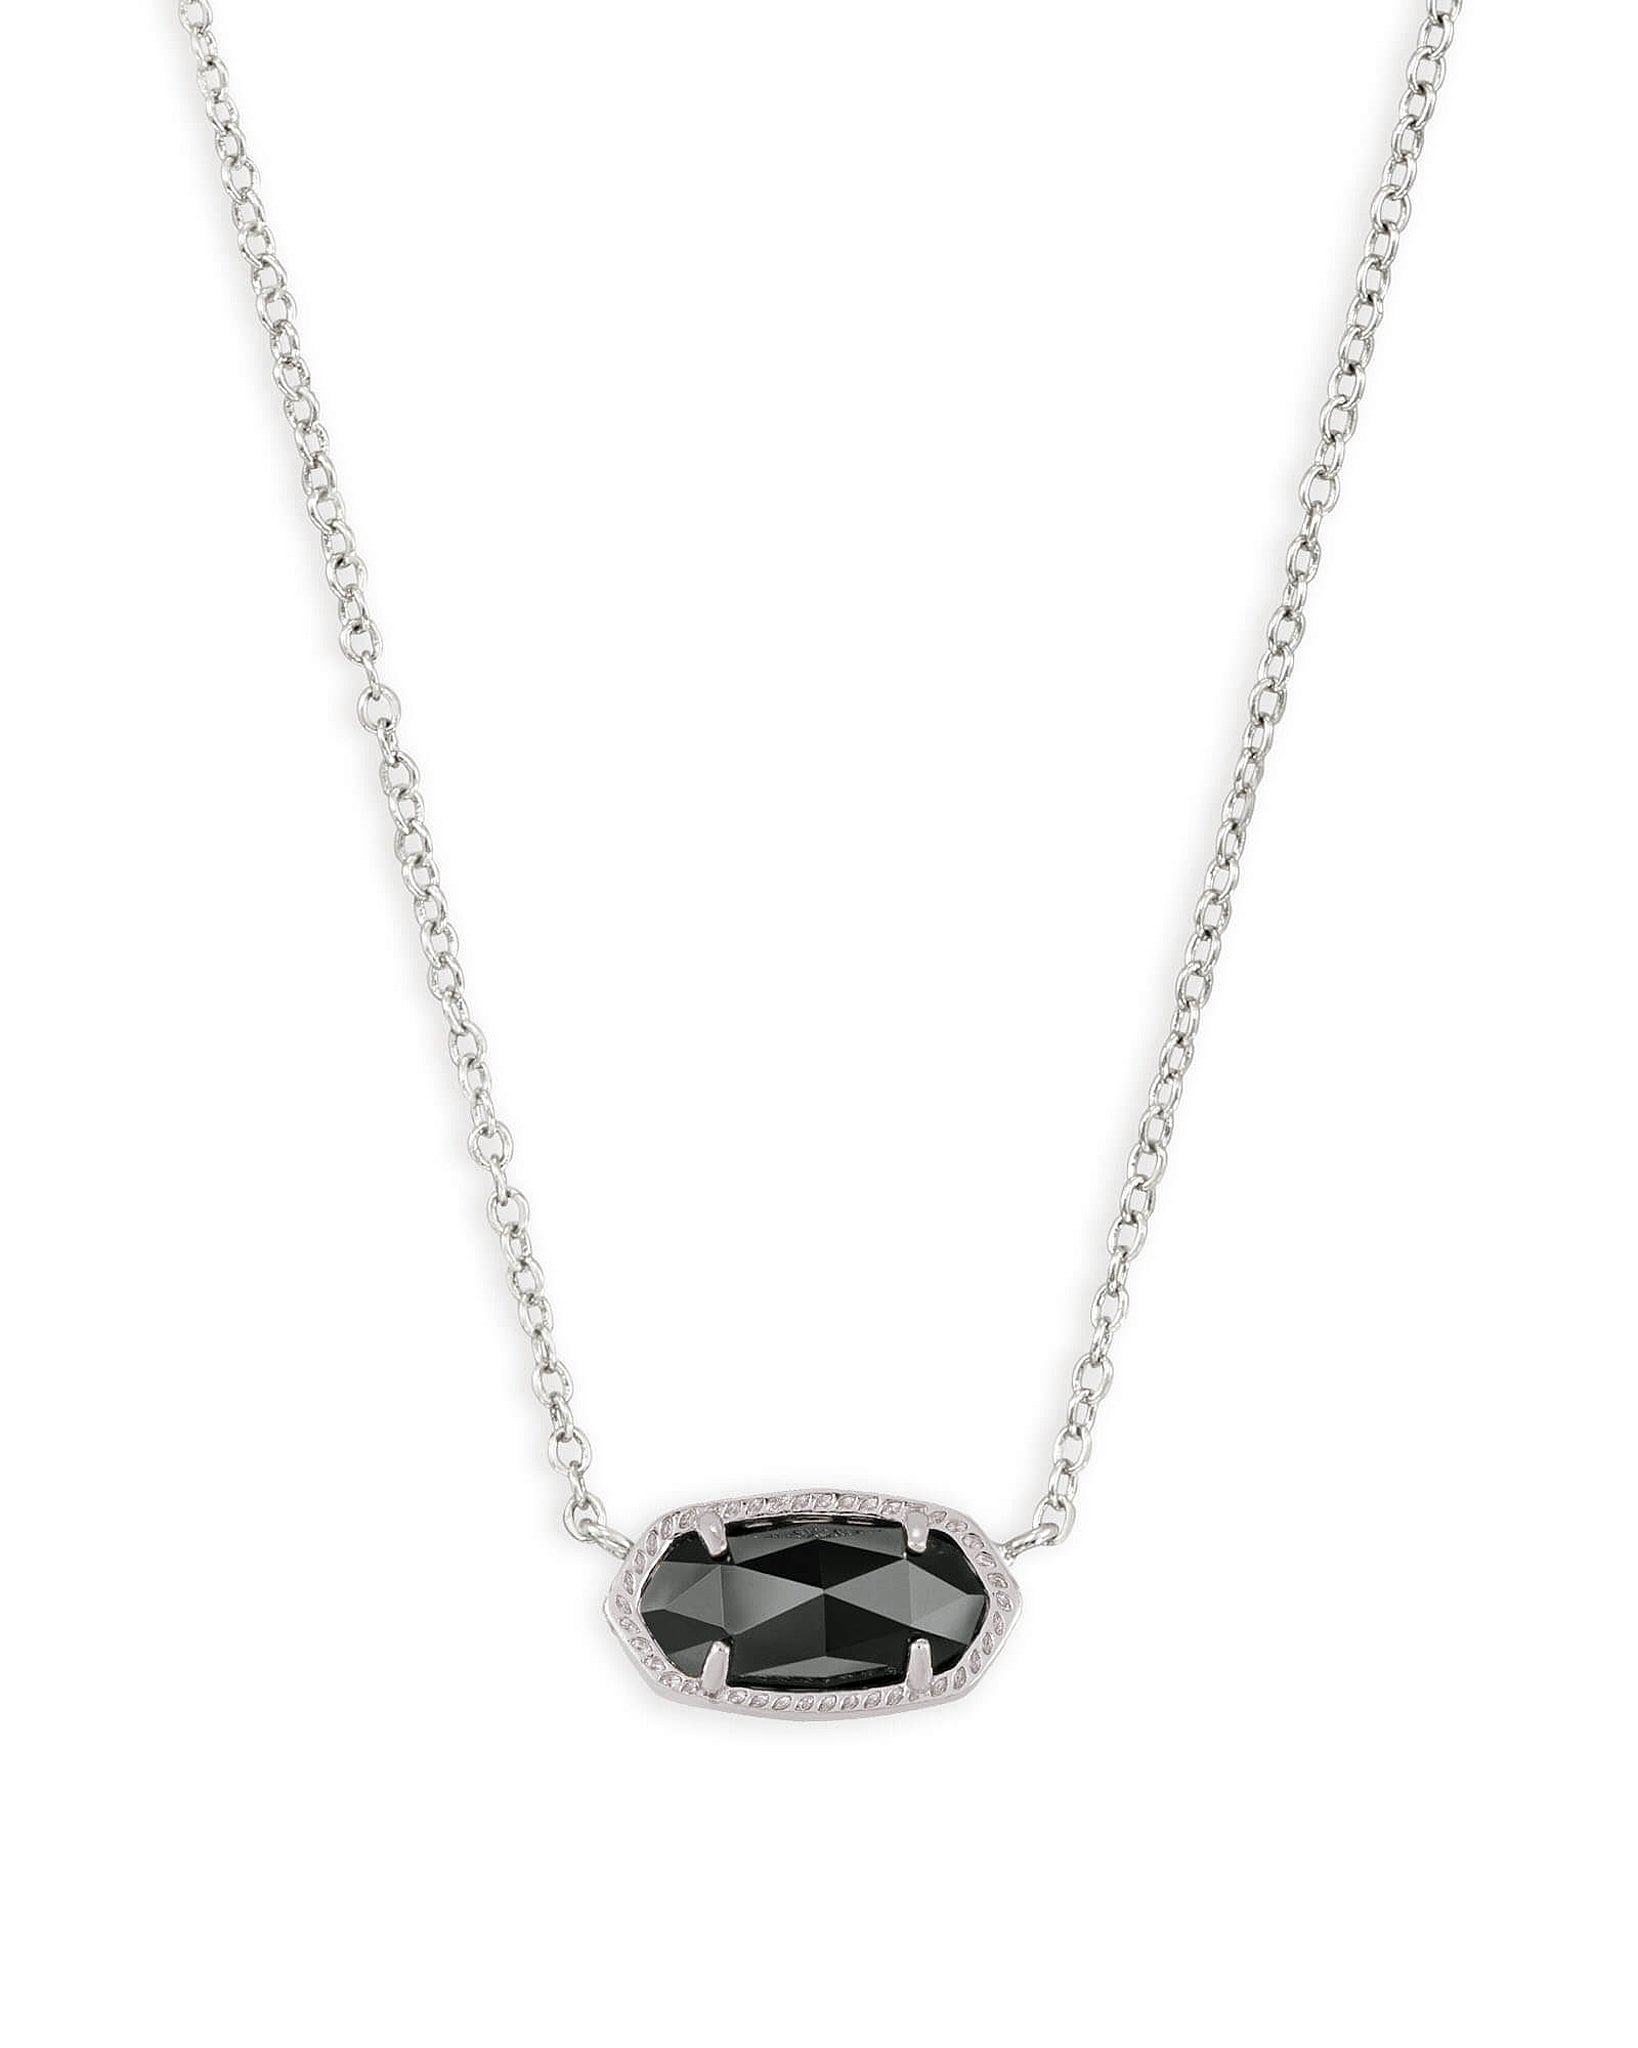 Kendra Scott Elisa Oval Pendant Necklace in Black and Rhodium Plated